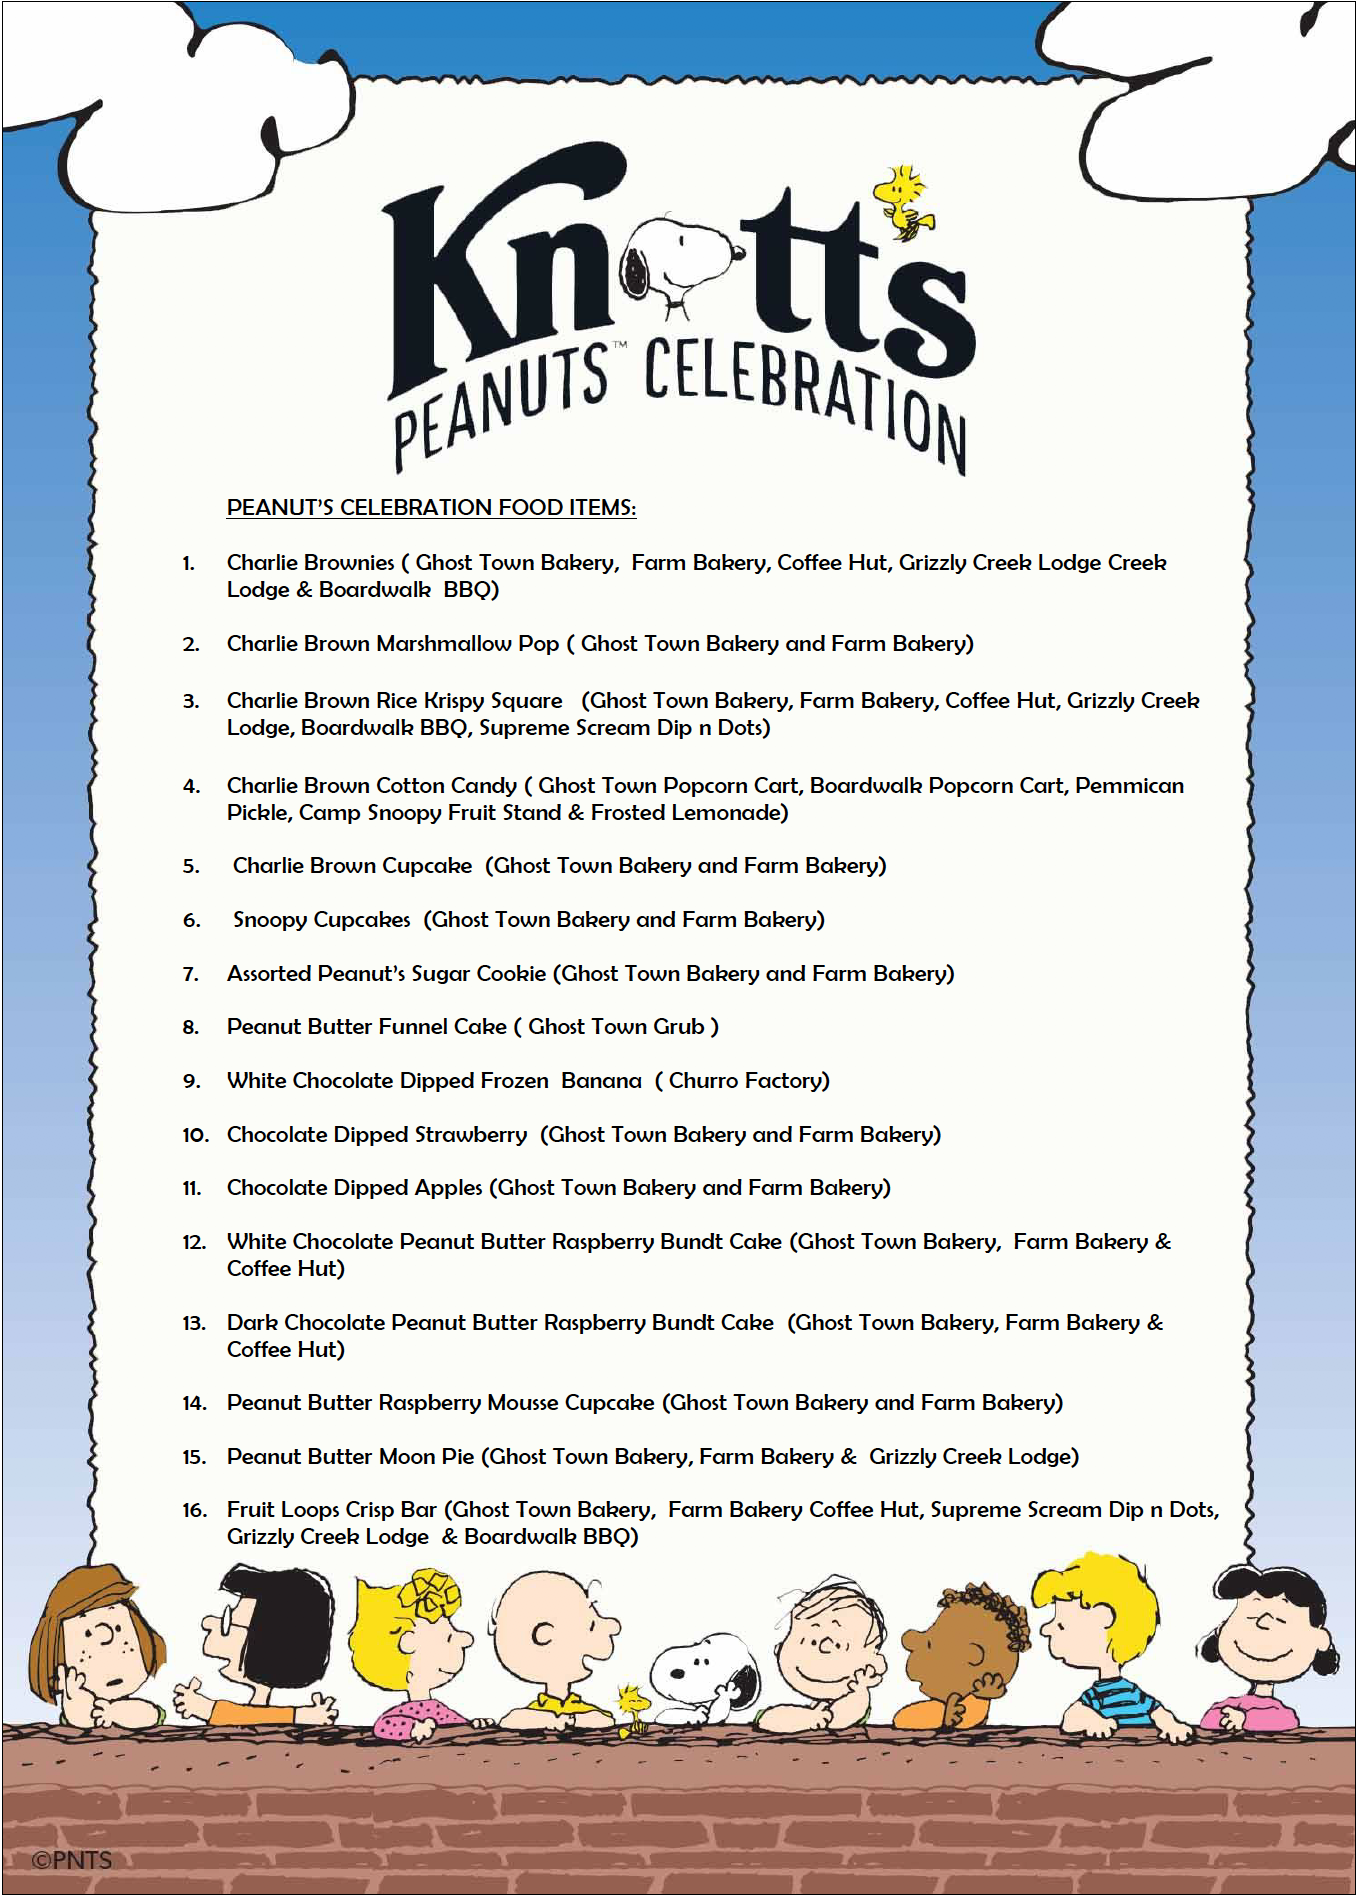 PEANUTS Celebration at Knott's Berry Farm in Buena Park. This is the complete food guide. - LivingMiVidaLoca.com